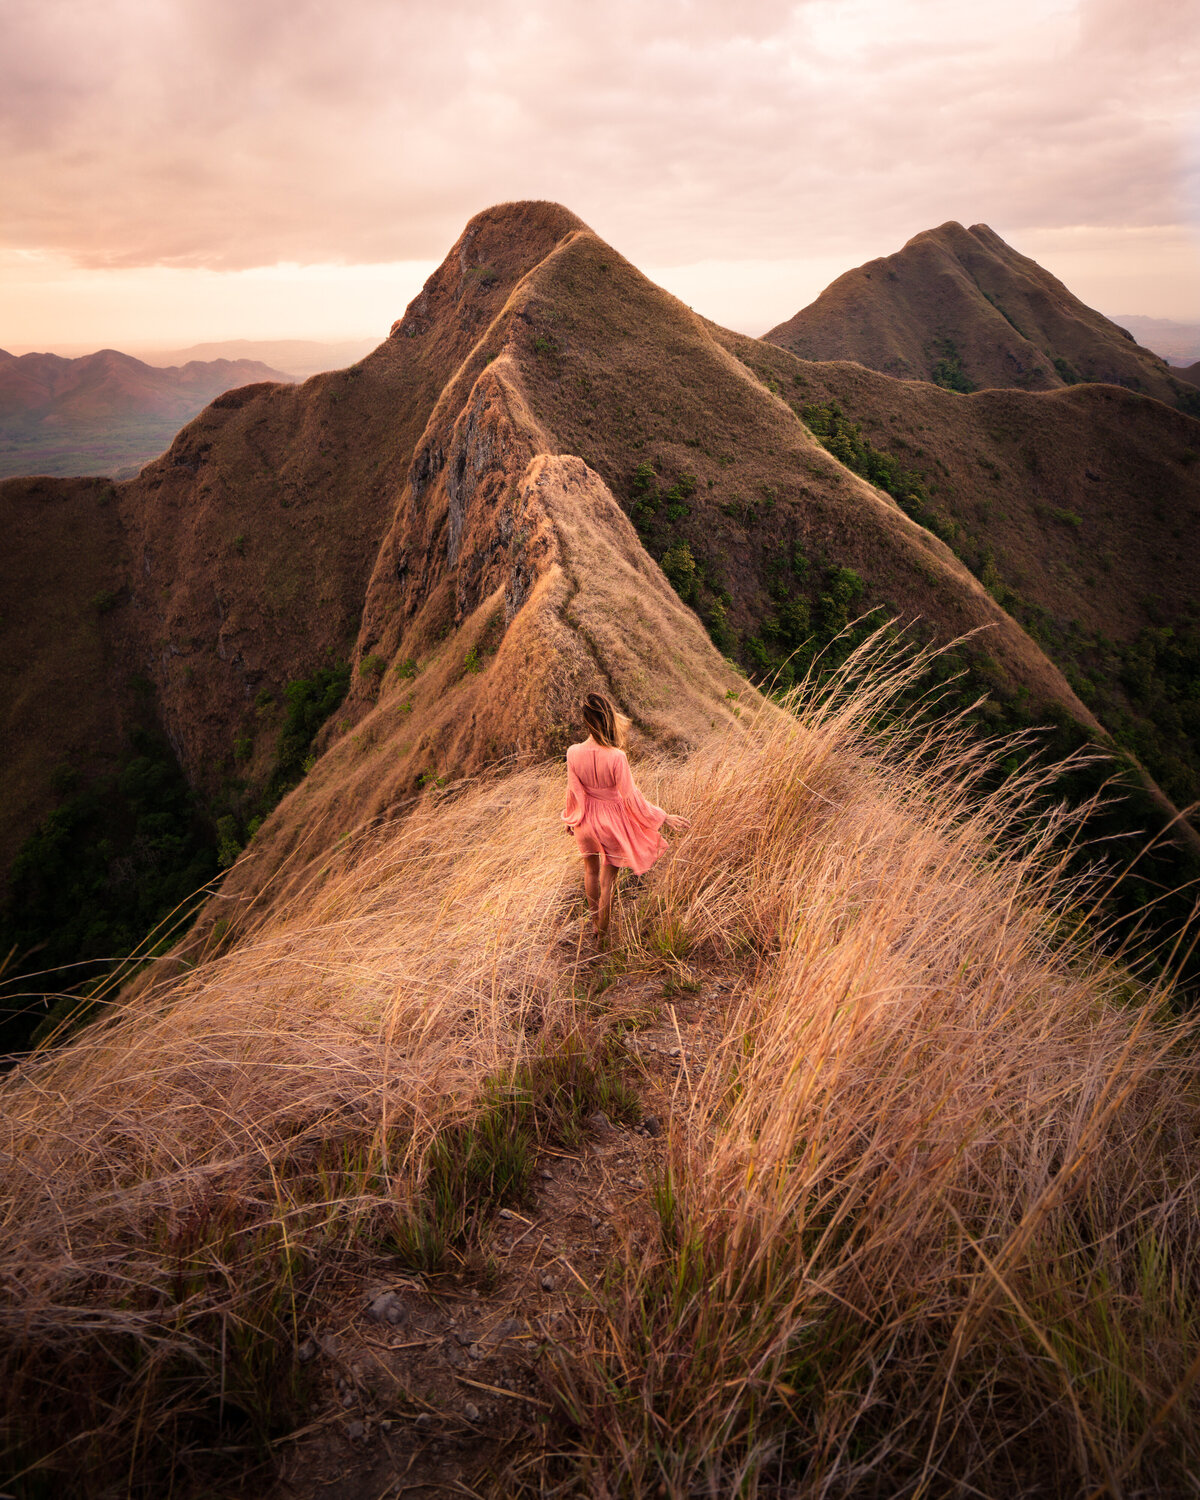 Jess of Jess Wandering in a pink dress walking through orange grass at the top of a mountain range